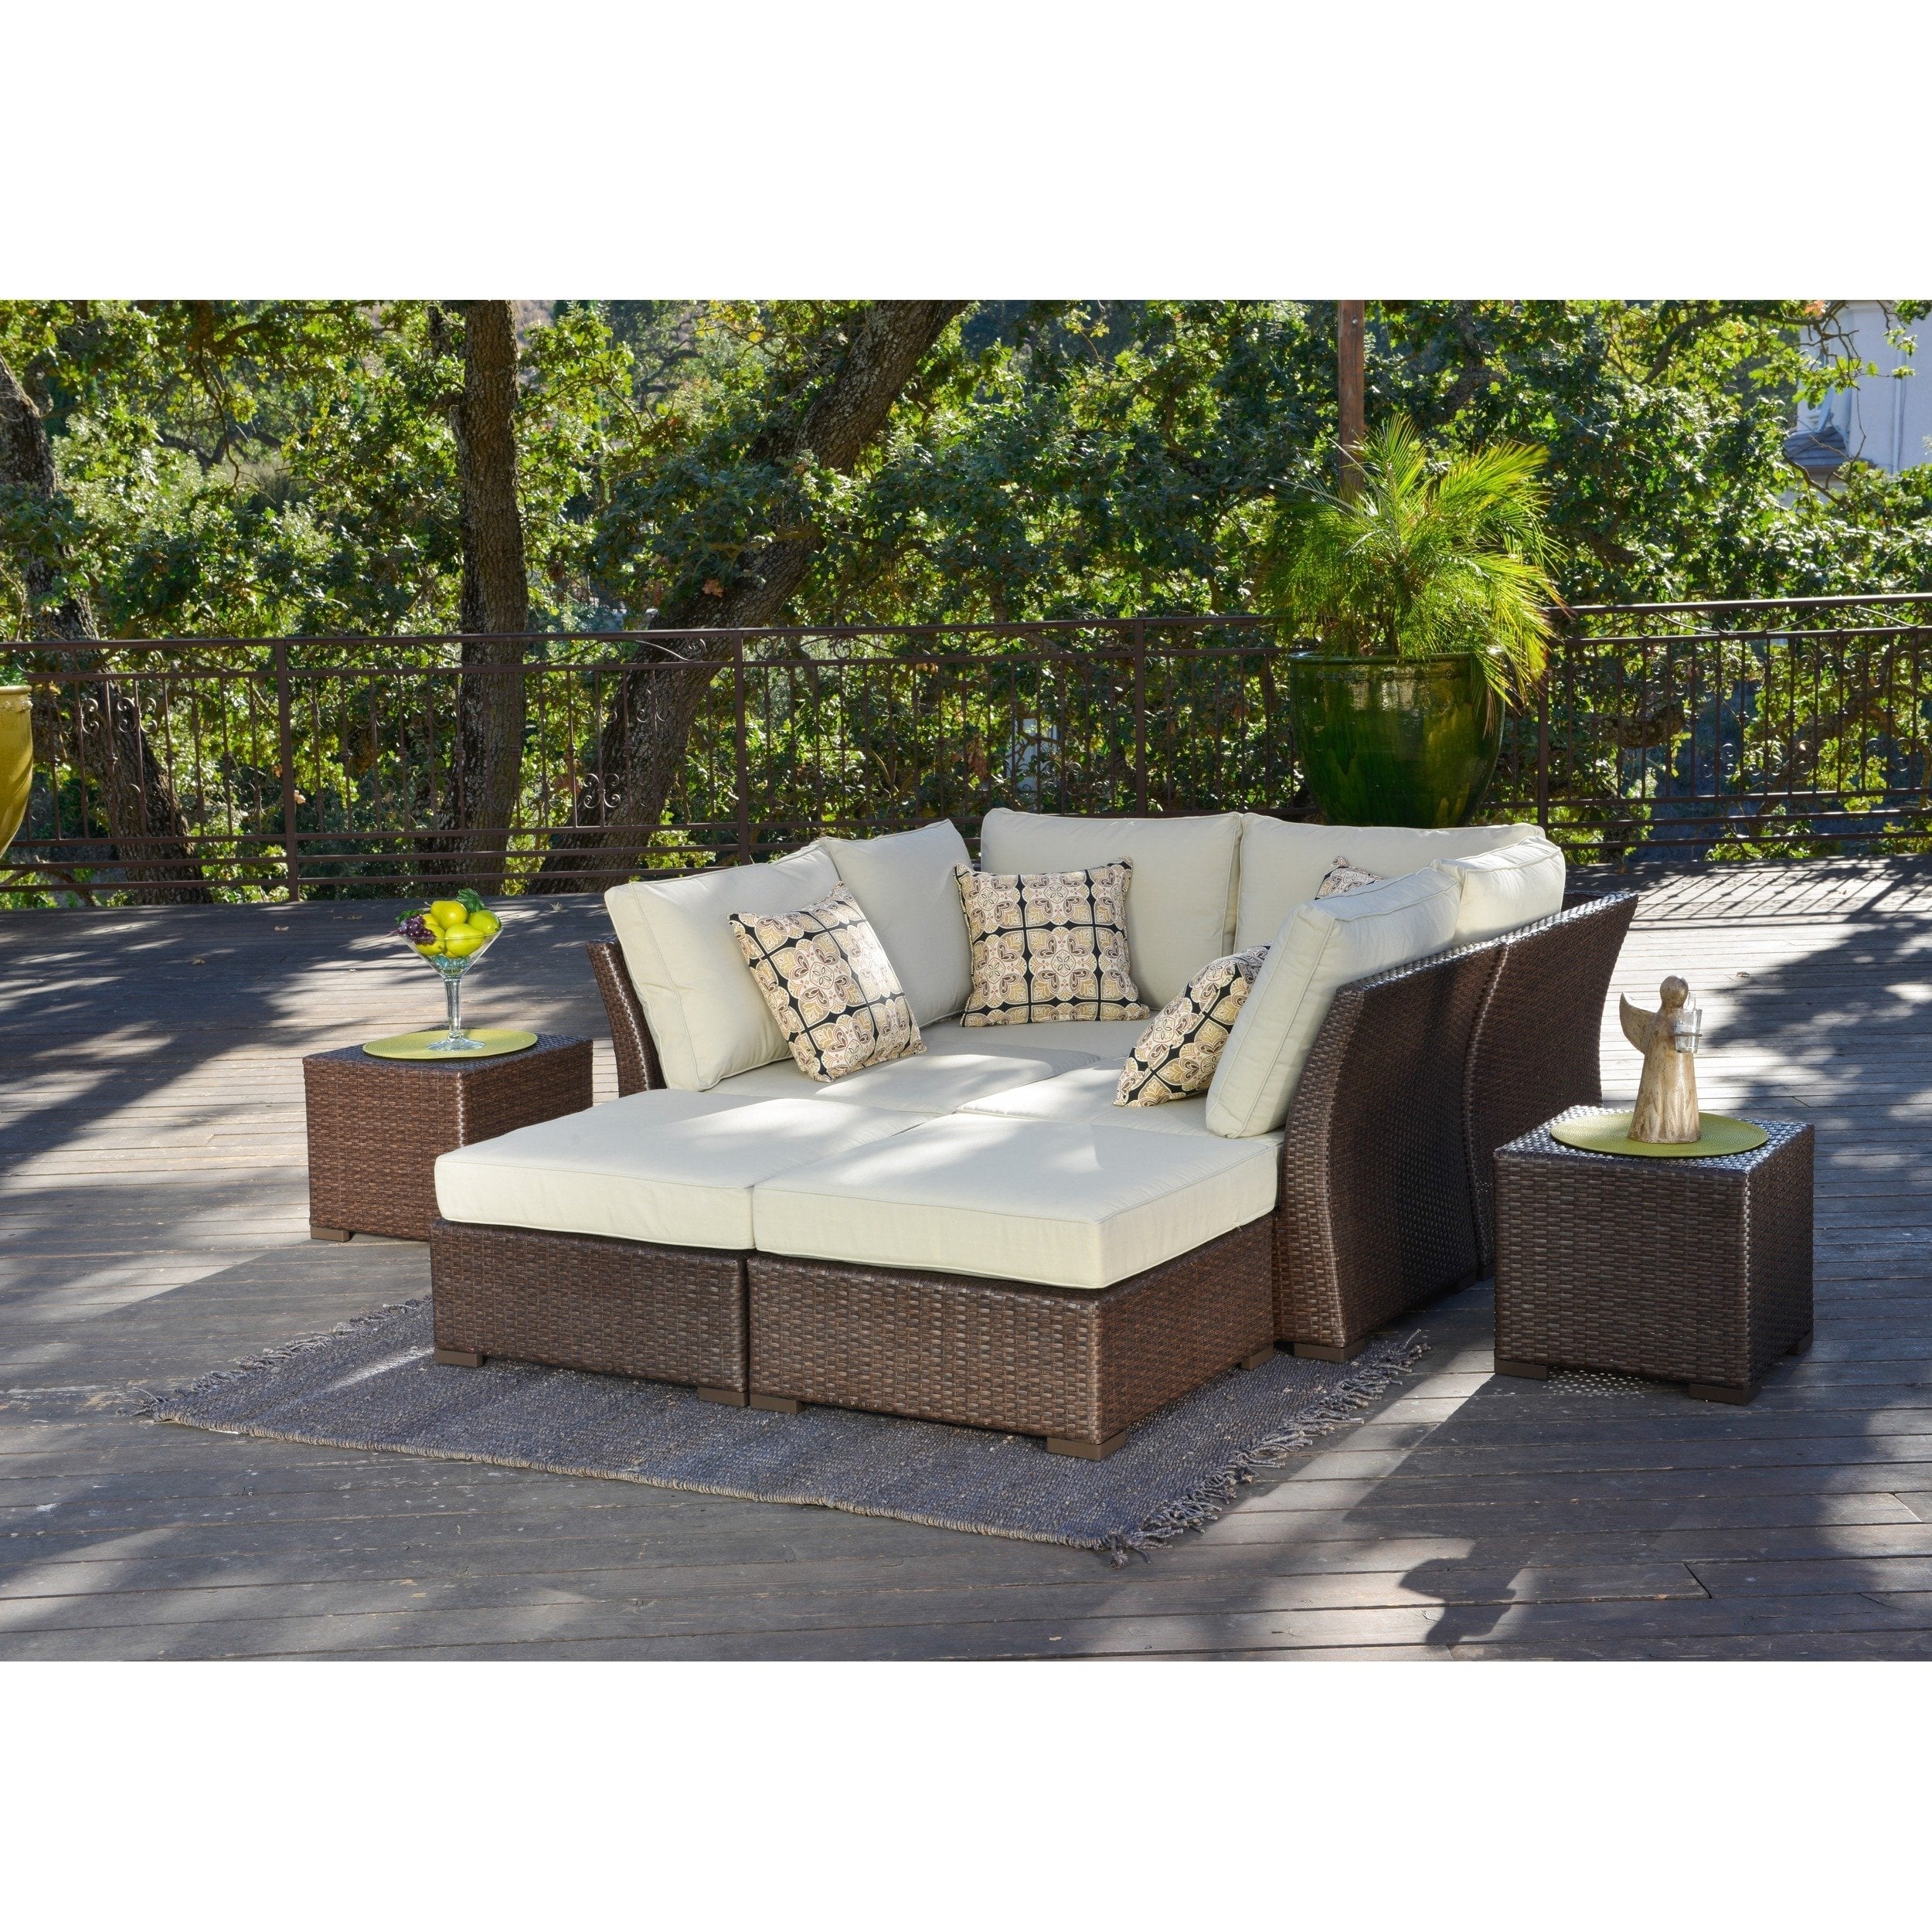 Shop Corvus Oreanne 8-piece Brown Wicker Patio Furniture Set - On Sale -  Free Shipping Today - Traveller Location - 9018067